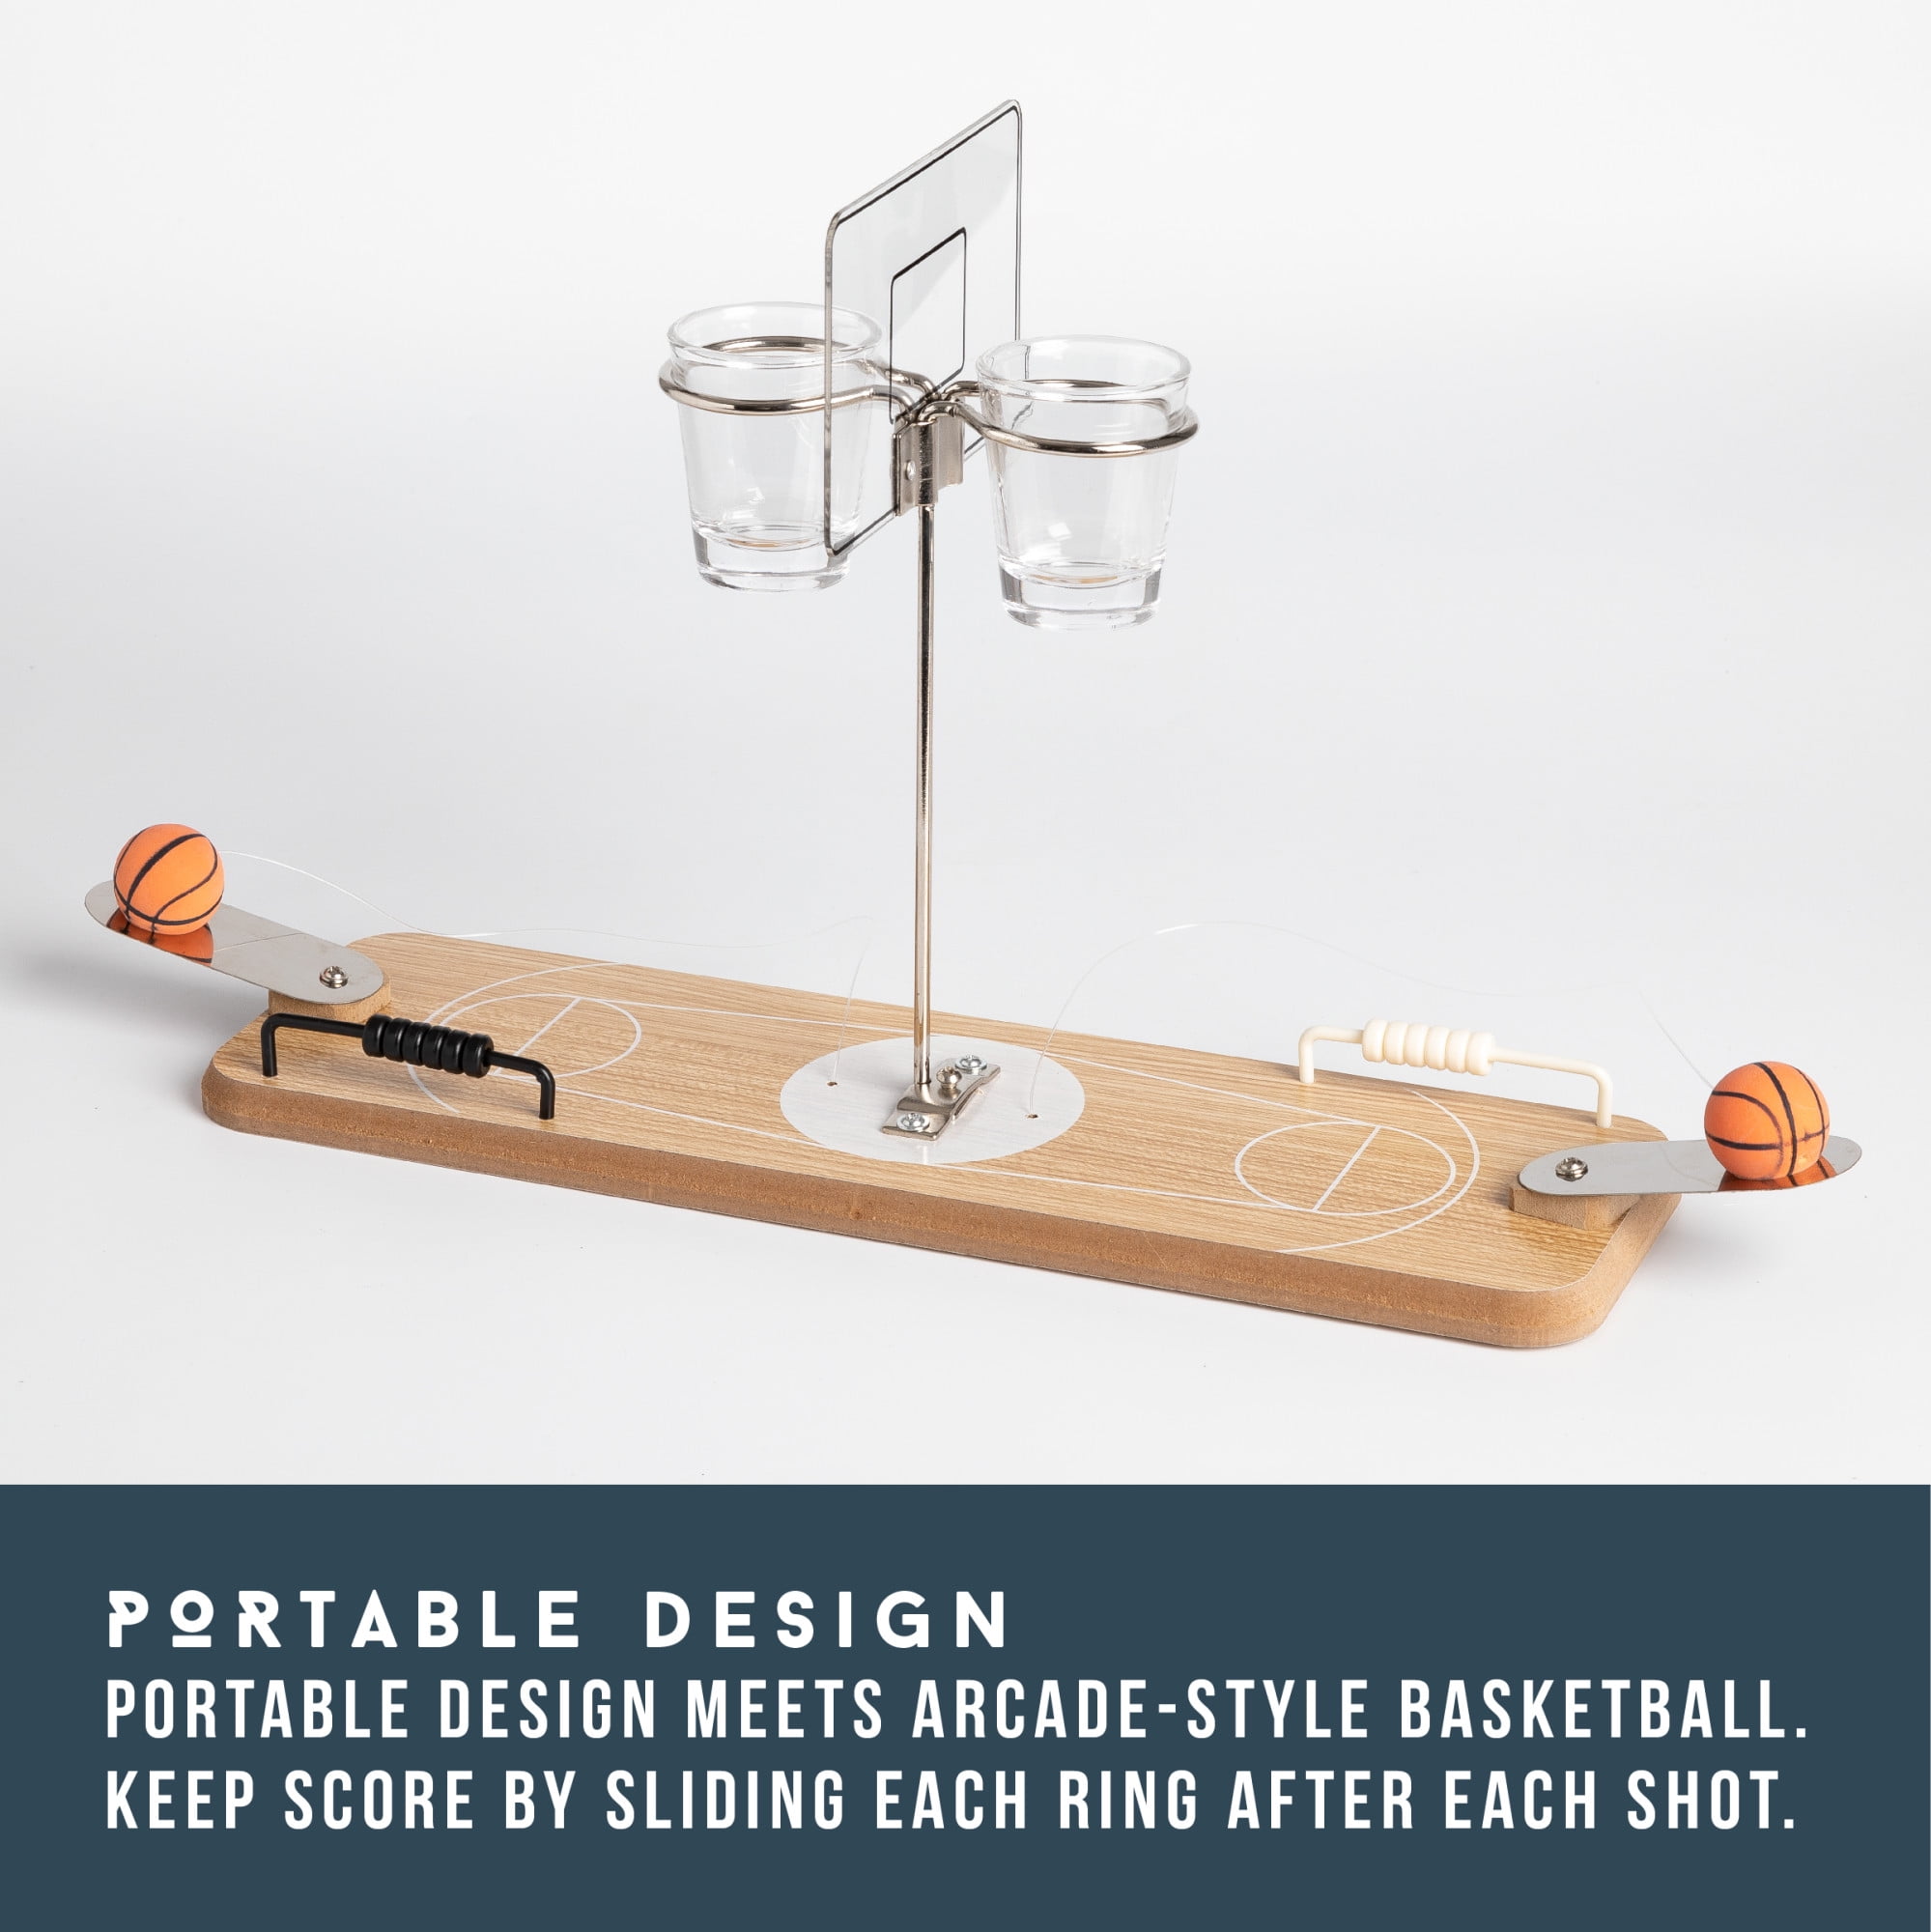 Perfect for Office Desk Coffee Table or Man Cave Refinery 2-Player Desktop Wooden Basketball Game Keep Score with Sliding Rings Vintage-Inspired Tabletop Hoops 